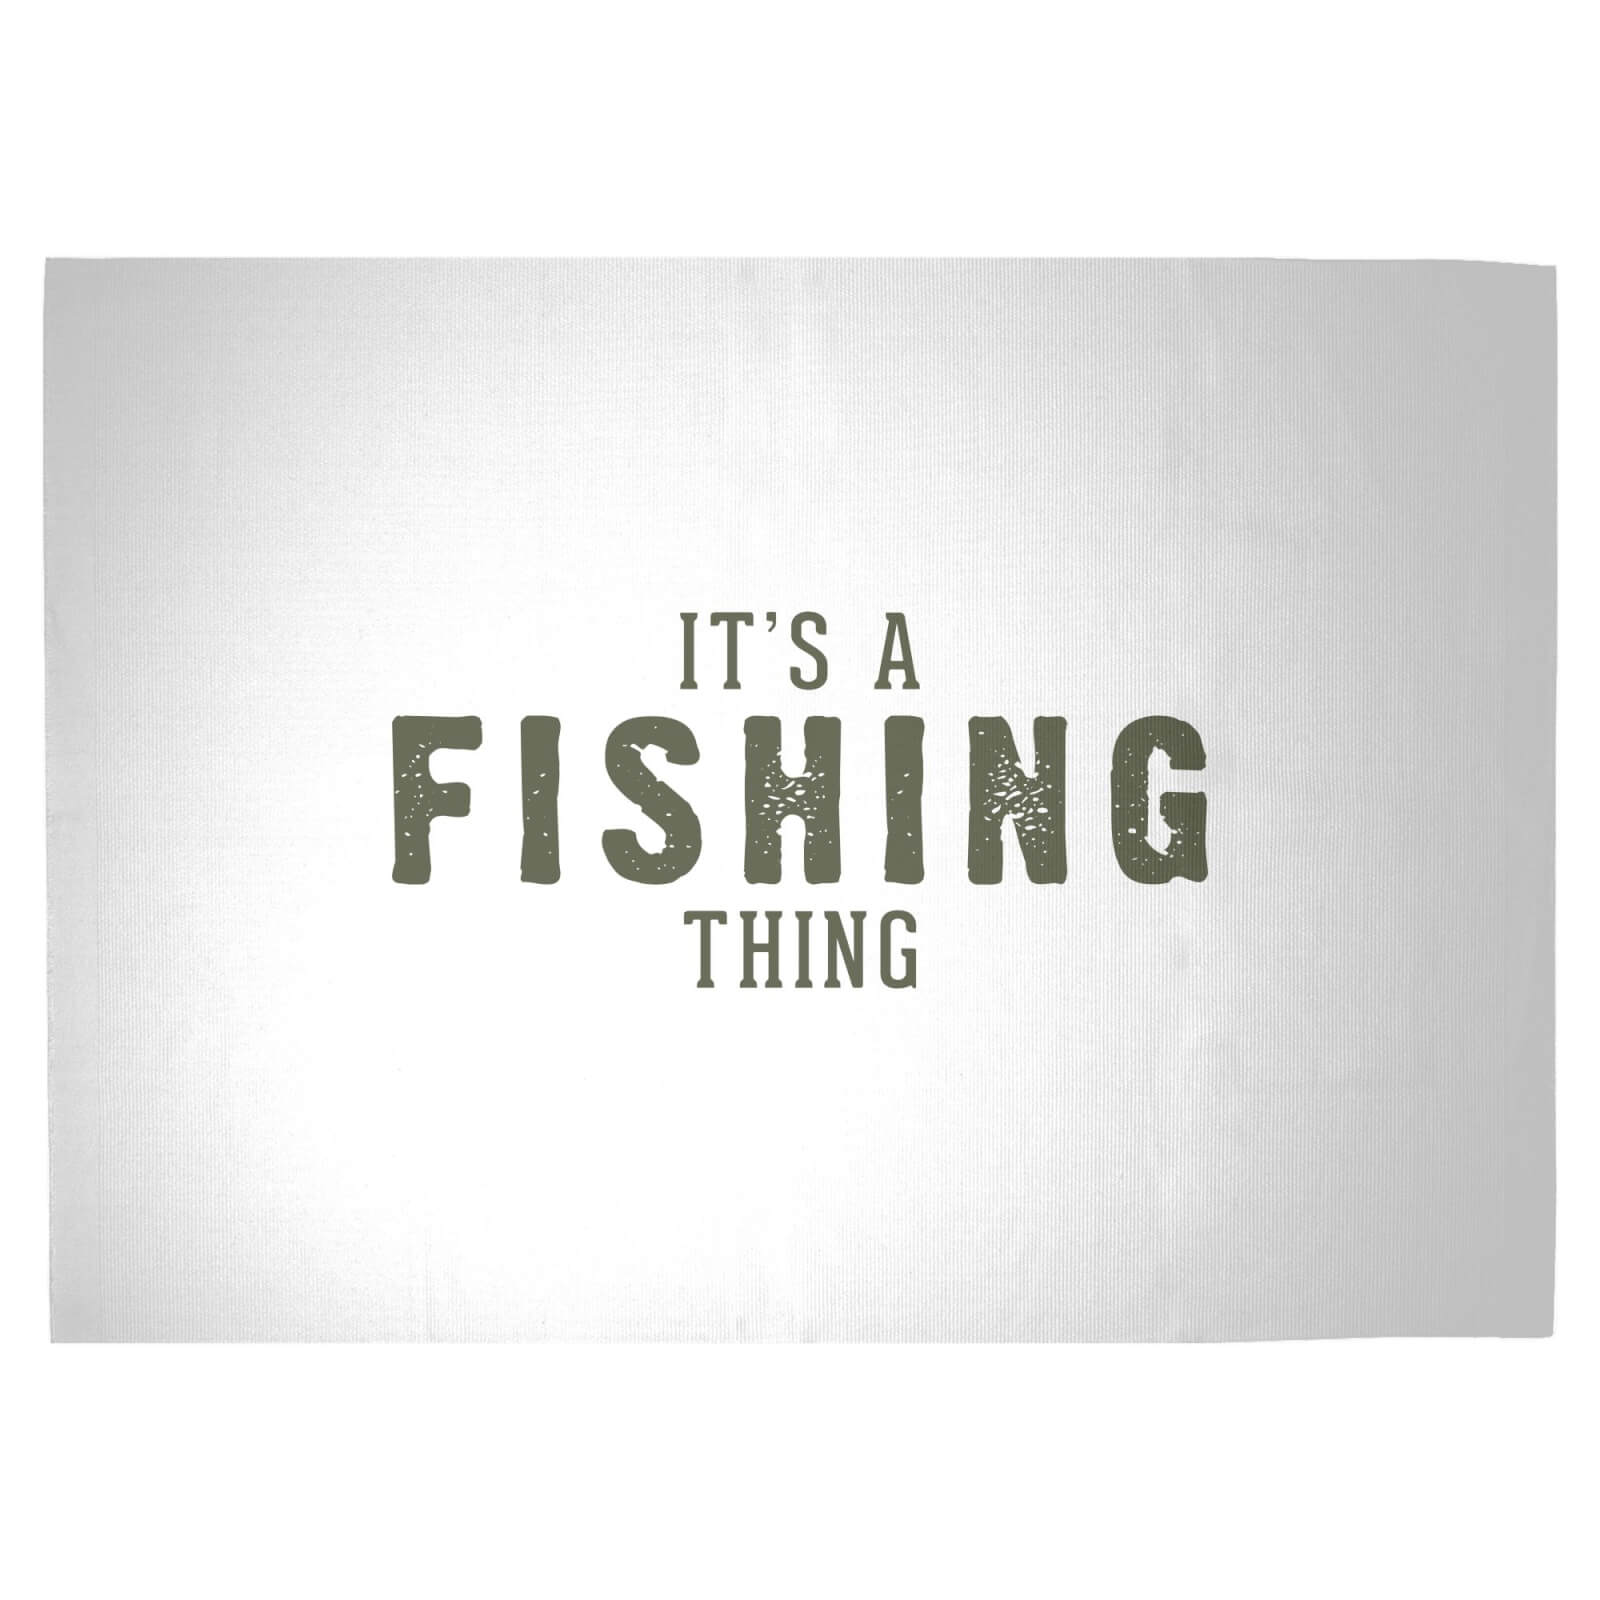 It's A Fishing Thing Woven Rug - Large